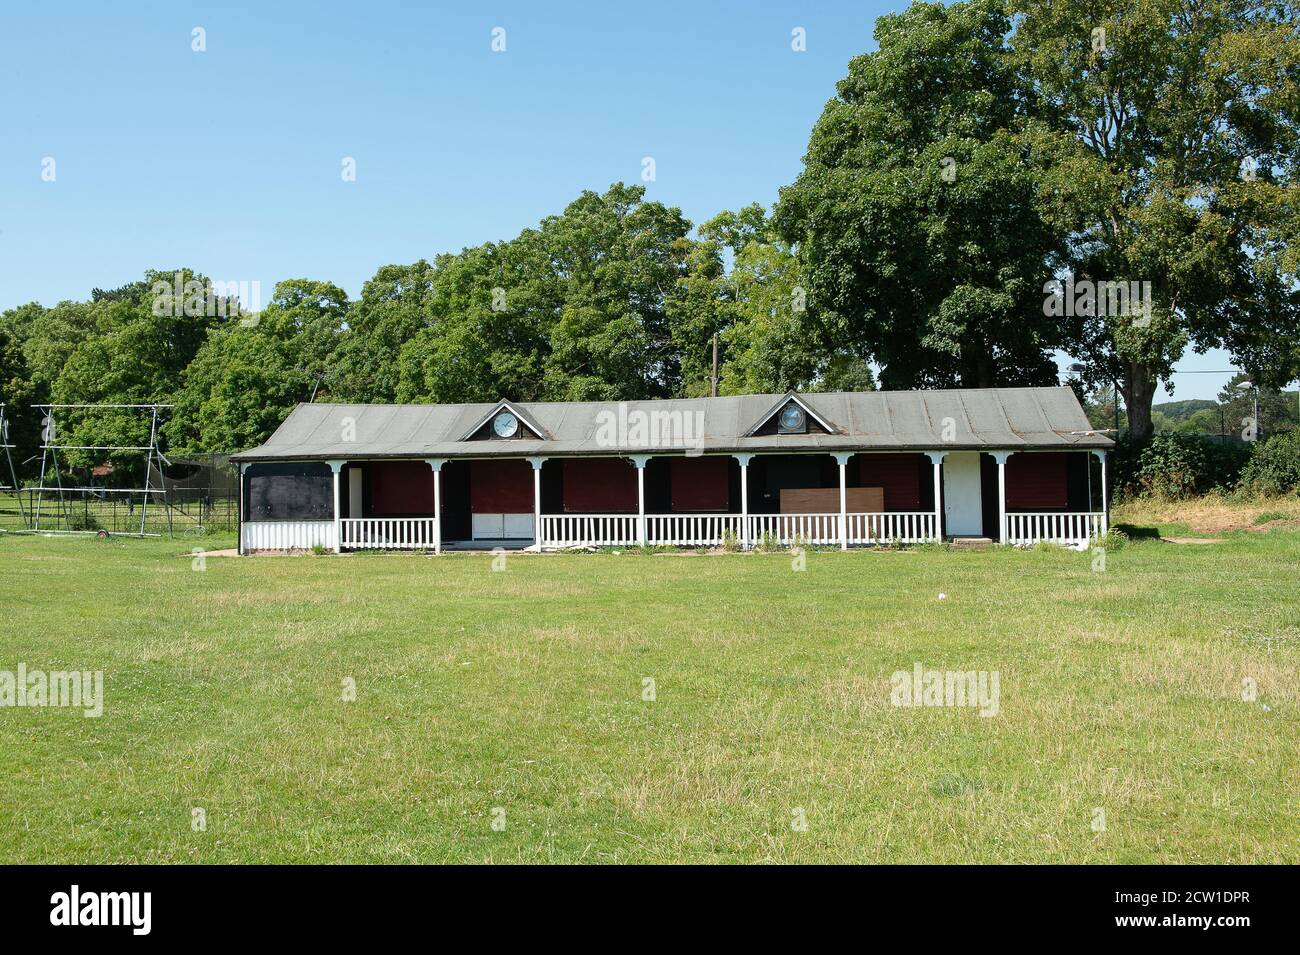 Marlow, Buckinghamshire, UK. 25th June, 2020. The Marlow Cricket Club pavilion remains boarded up as cricket is not allowed to be played yet in England due to the Coronavirus Covid-19 Pandemic lockdown rules. Credit: Maureen McLean/Alamy Stock Photo